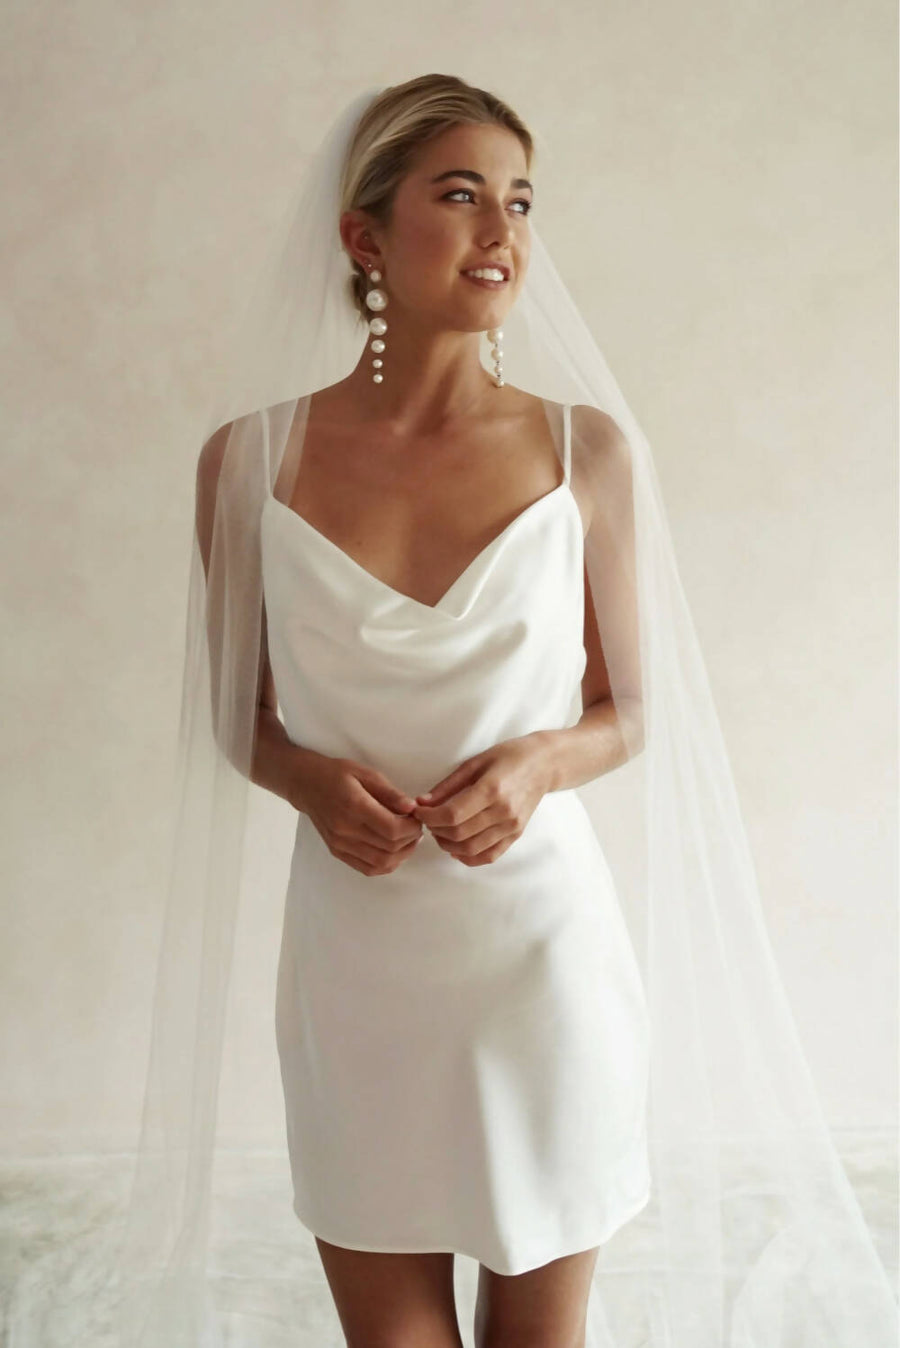 TOGETHER FOREVER I | One Tier Embroidered Veil in Cathedral Length